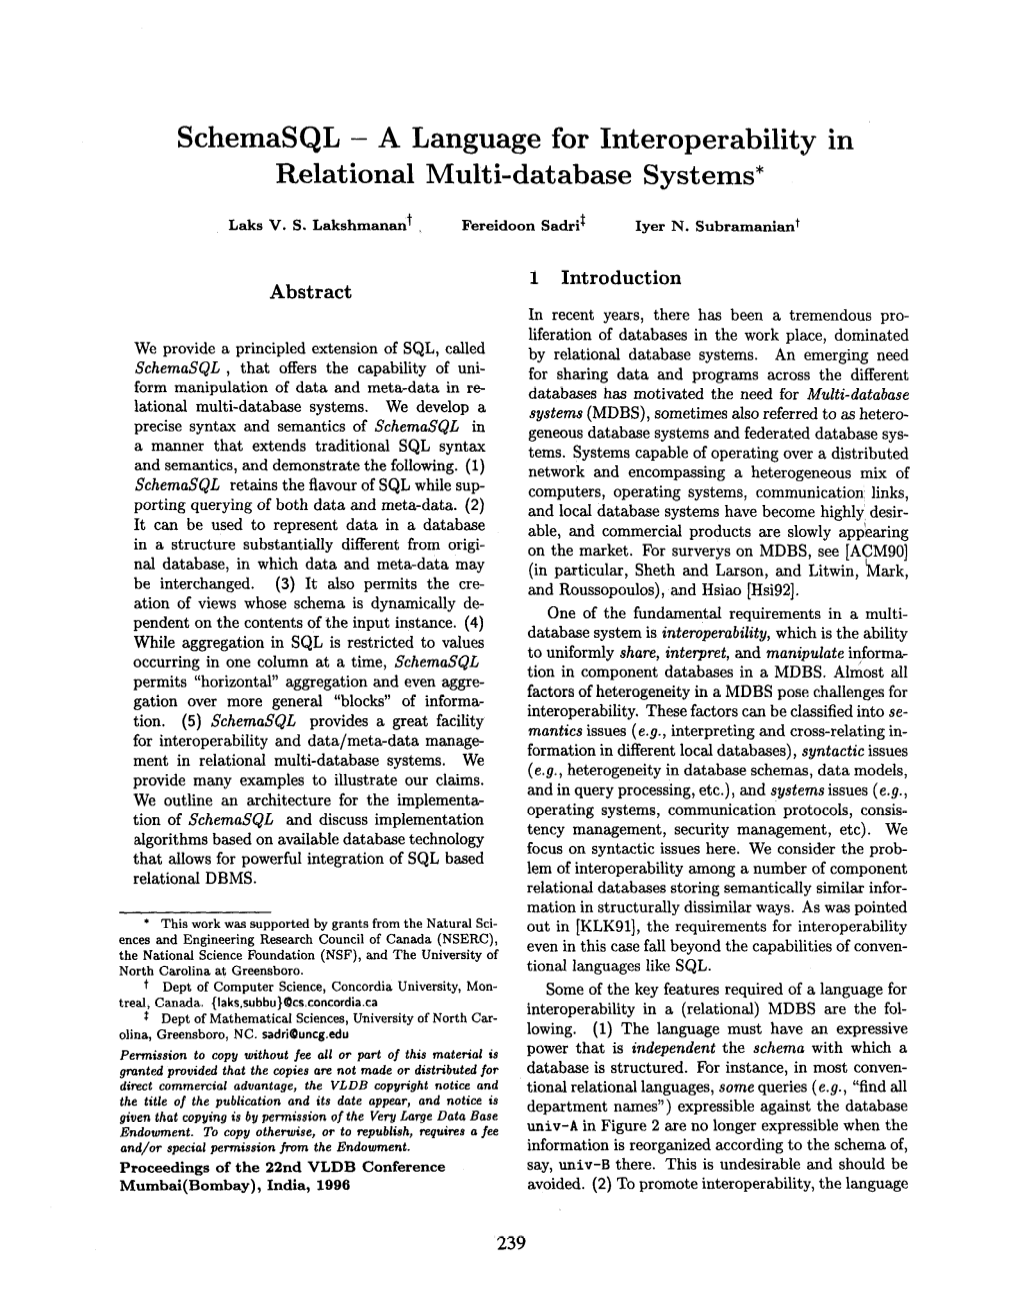 A Language for Interoperability in Relational Multi-Database Systems*